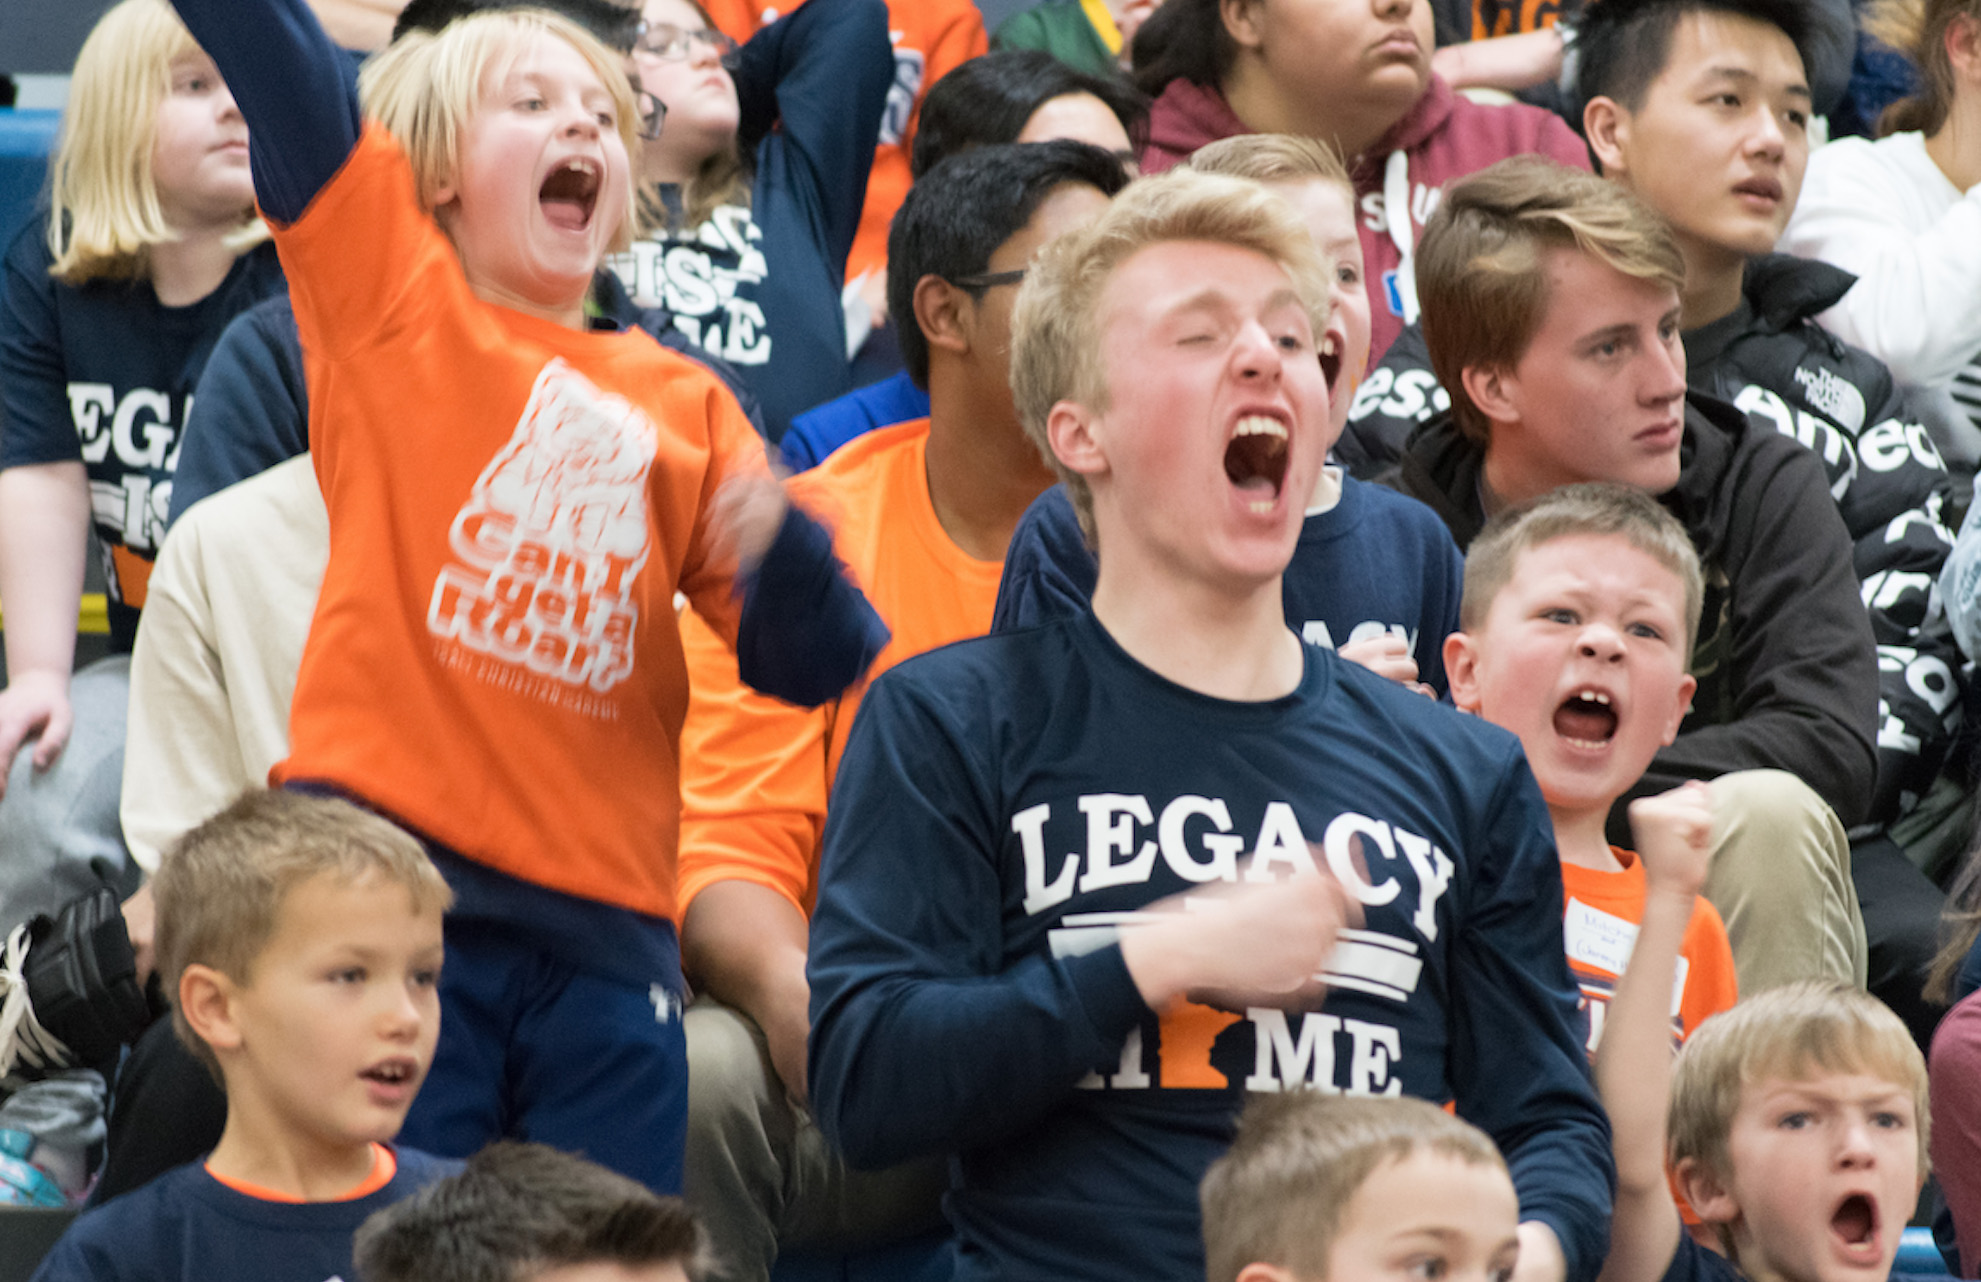 homecoming-2018-legacy-is-home-legacy-christian-academy